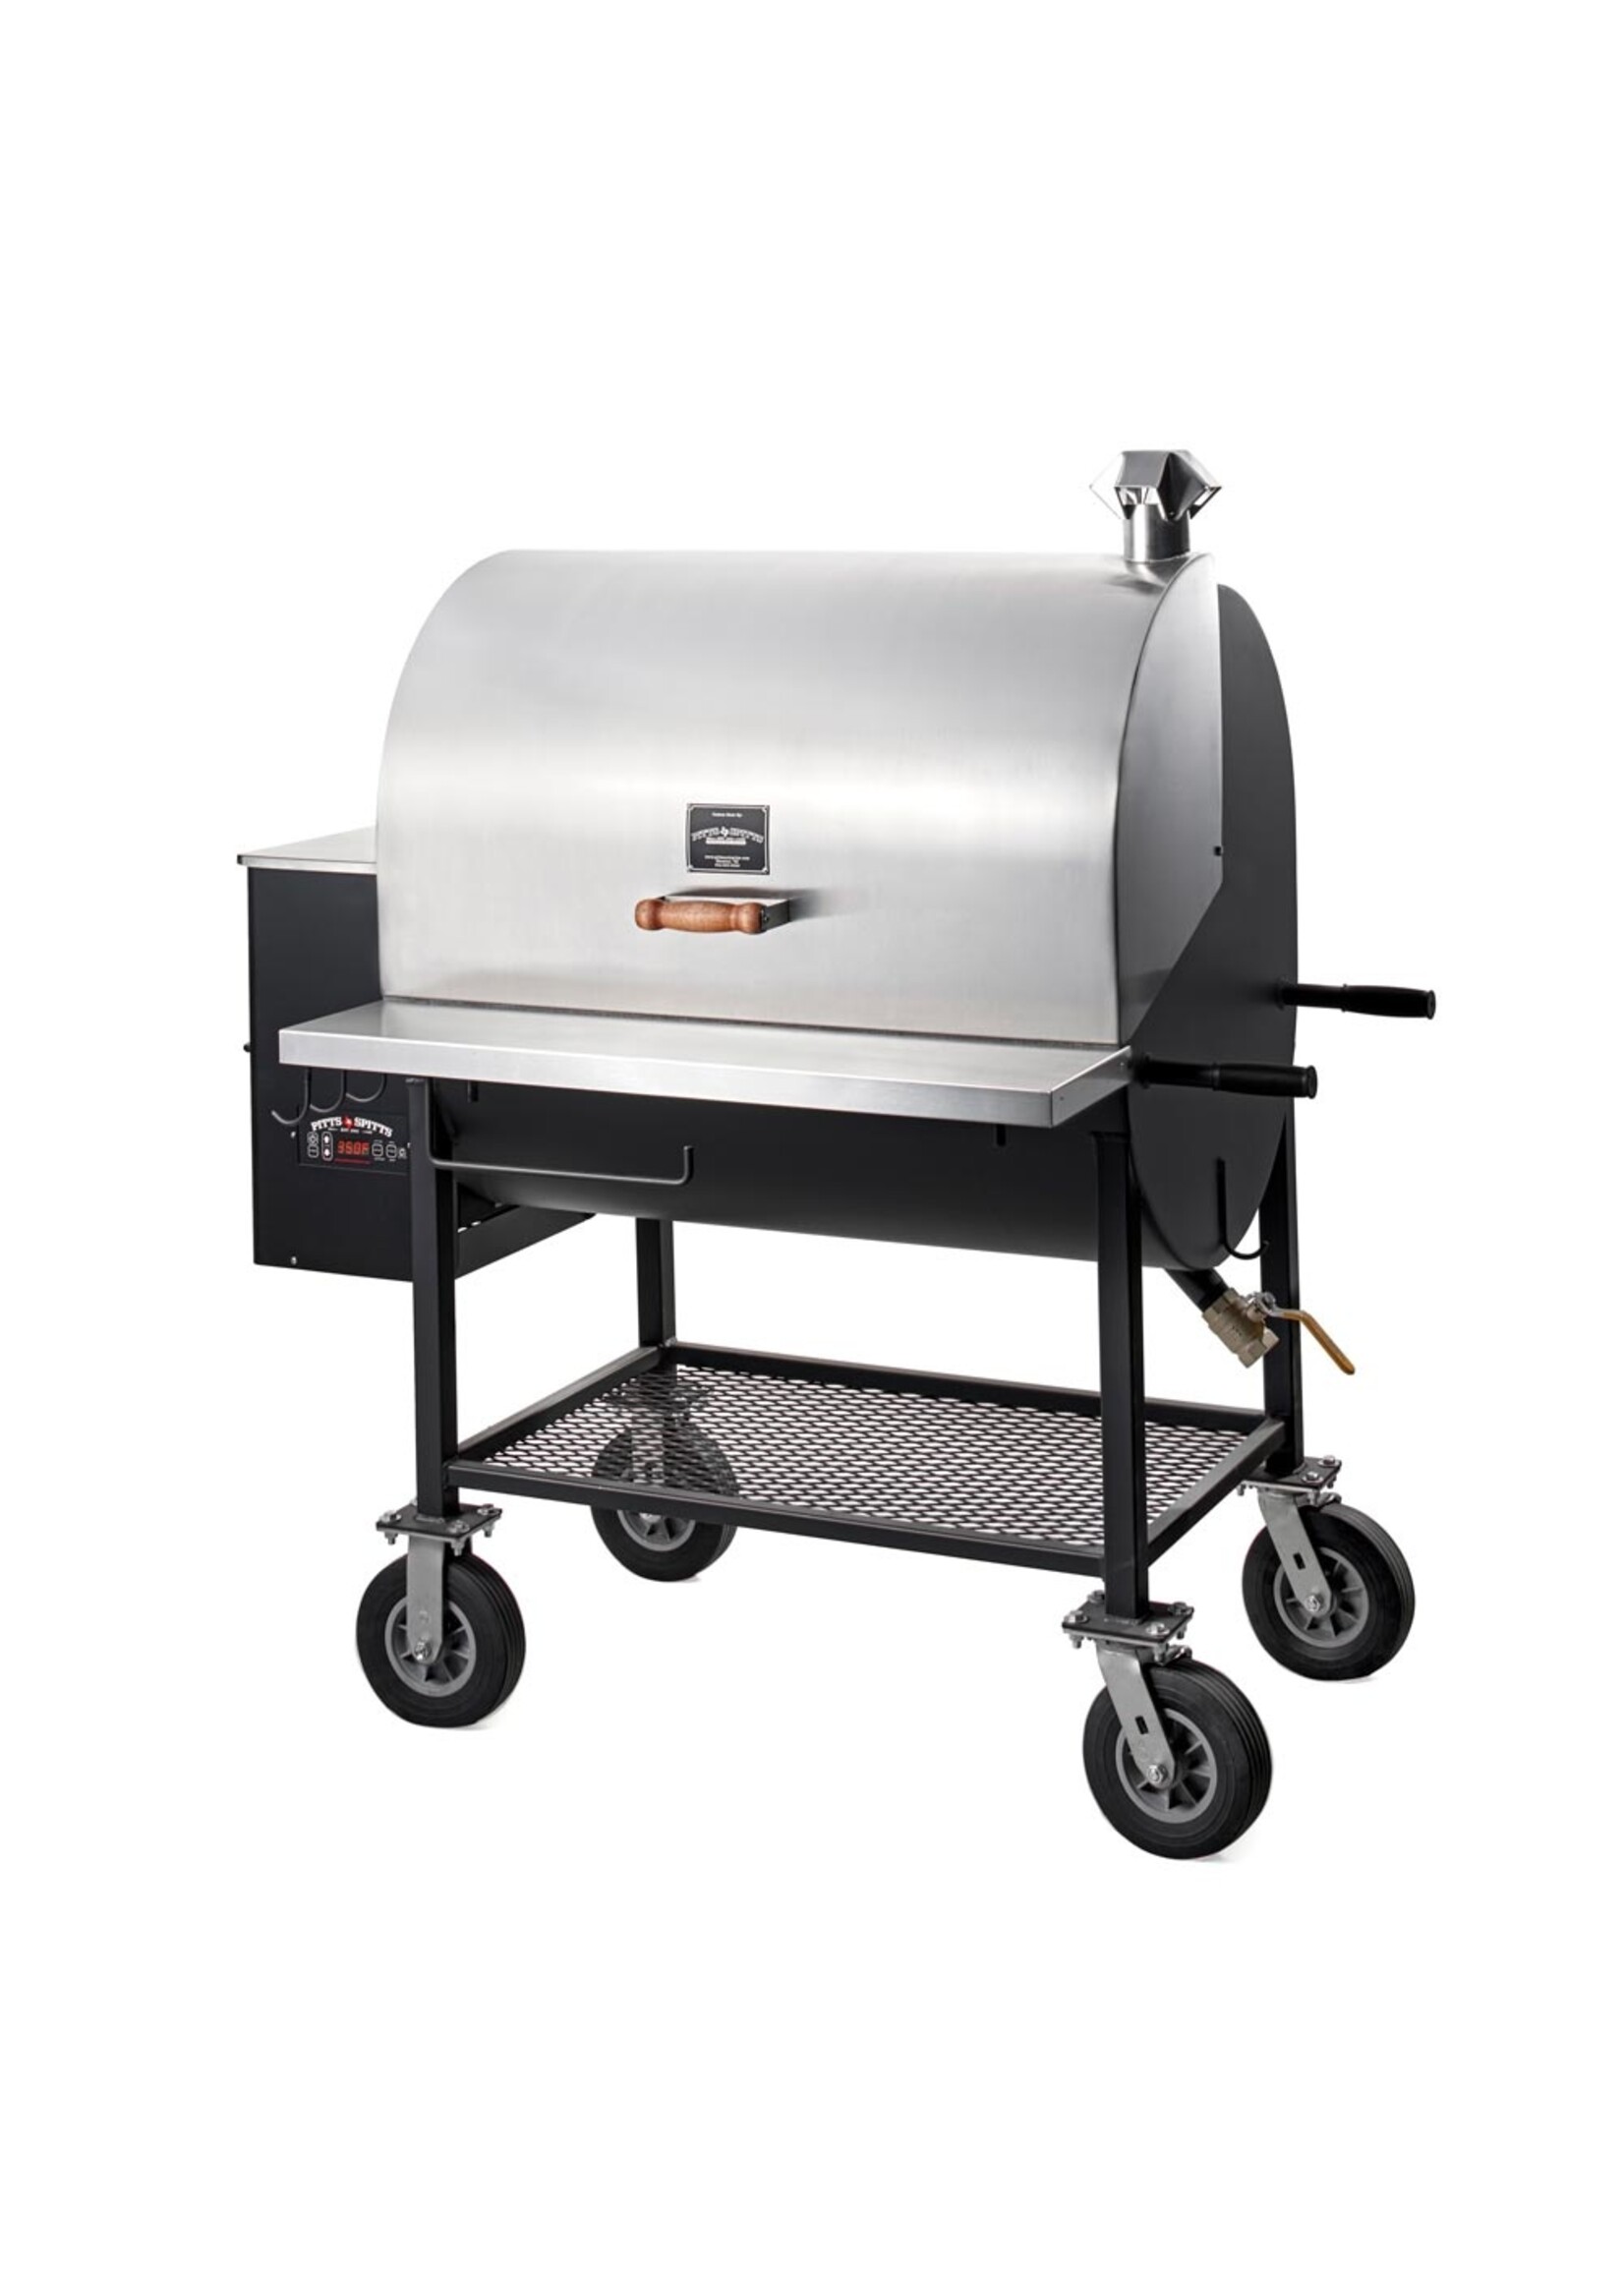 Pitts & Spitts Pitts & Spitts Maverick 2000 Pellet Grill w/ 8" Casters